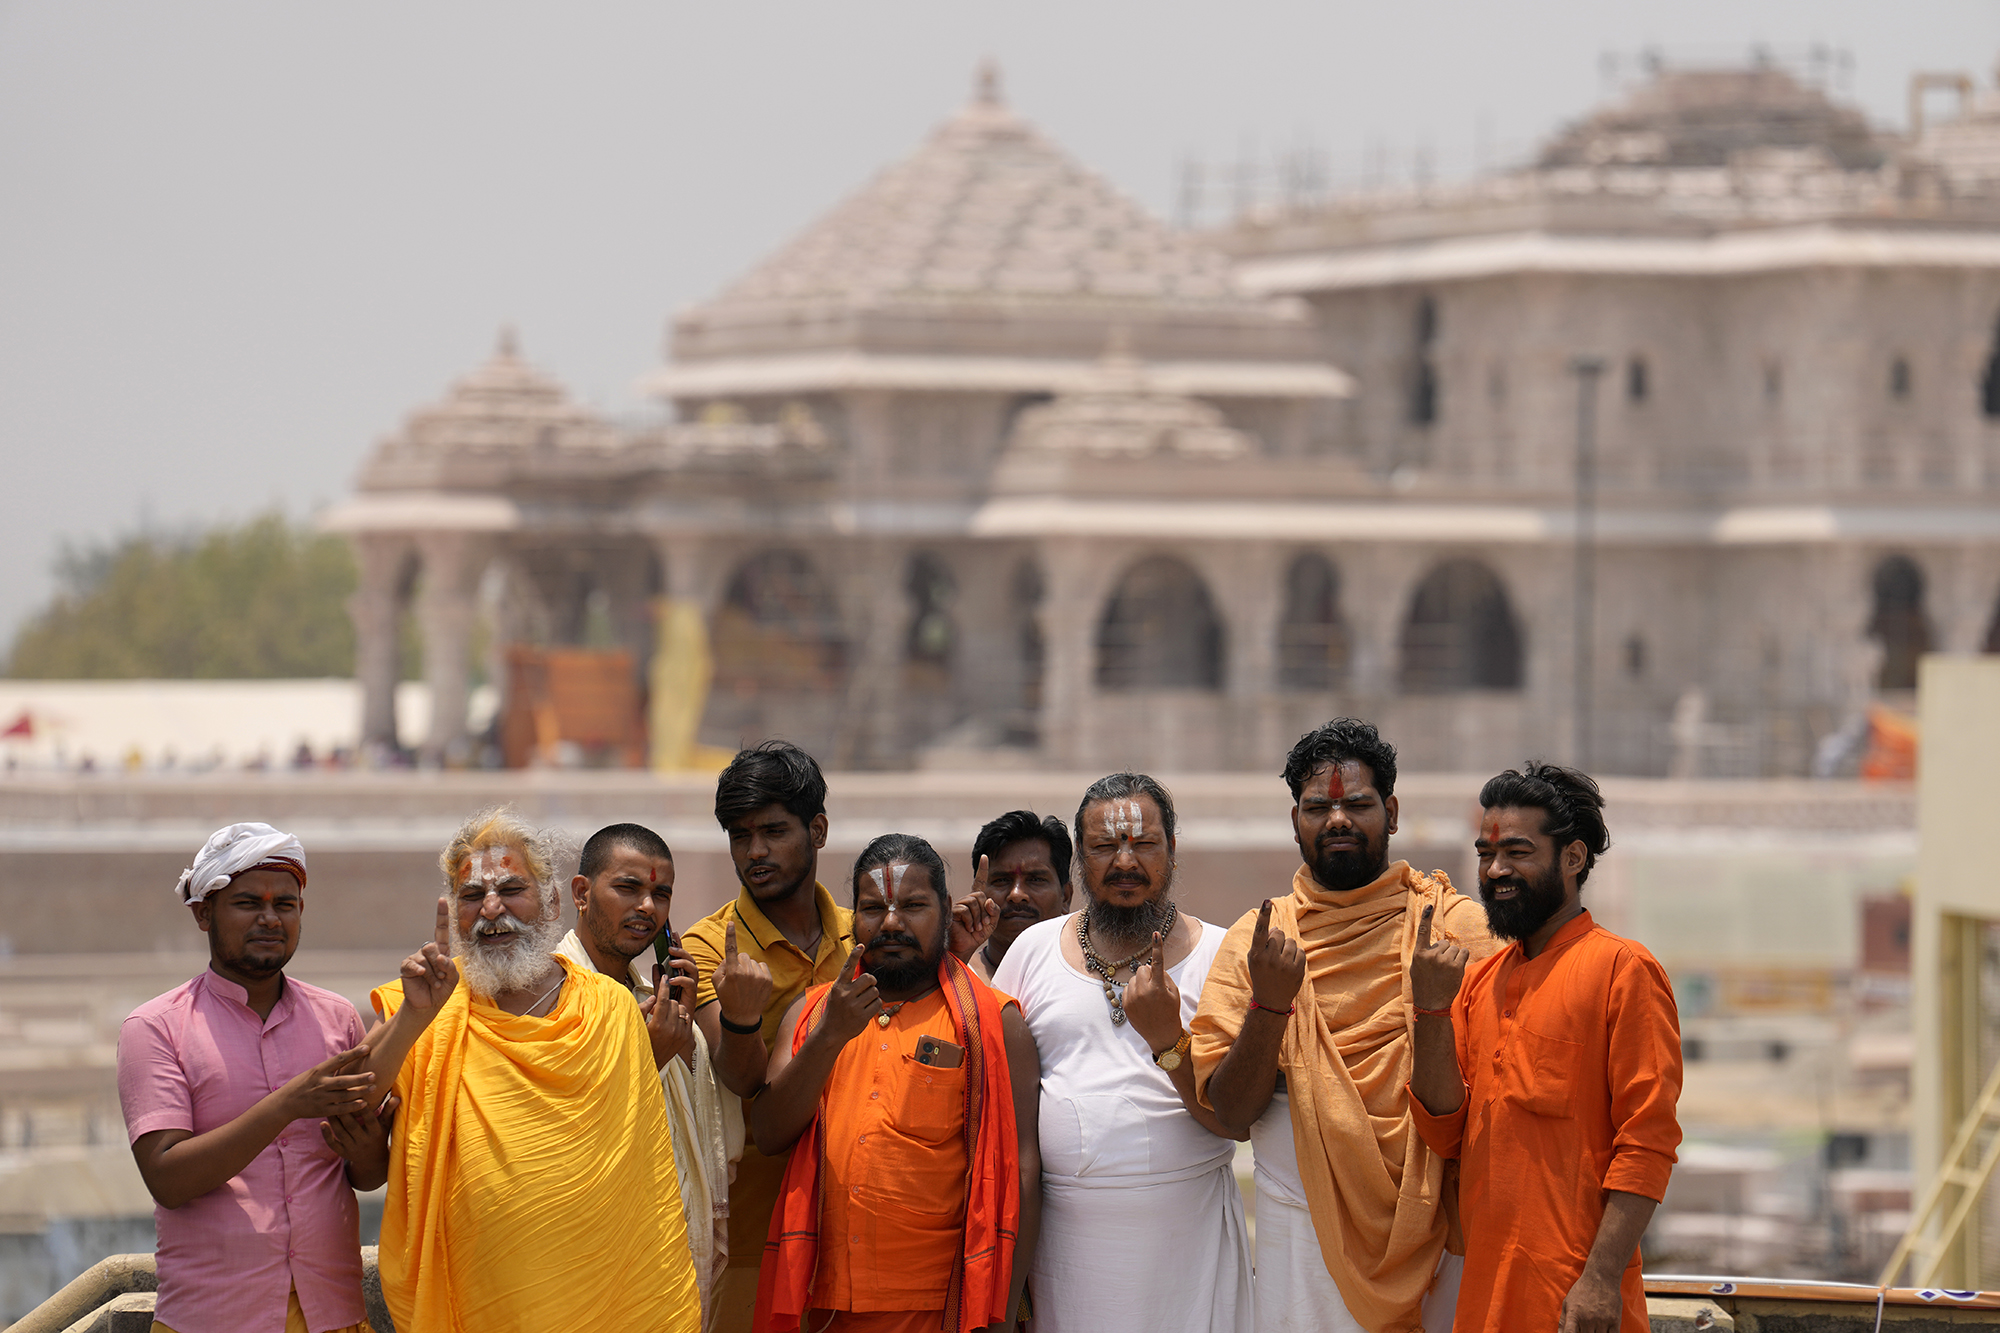 Indian Hindu holy men who voted in the fifth round of multi-phase national elections pose for photographs in front of the temple of Hindu god Ram in Ayodhya, India, on May 20.